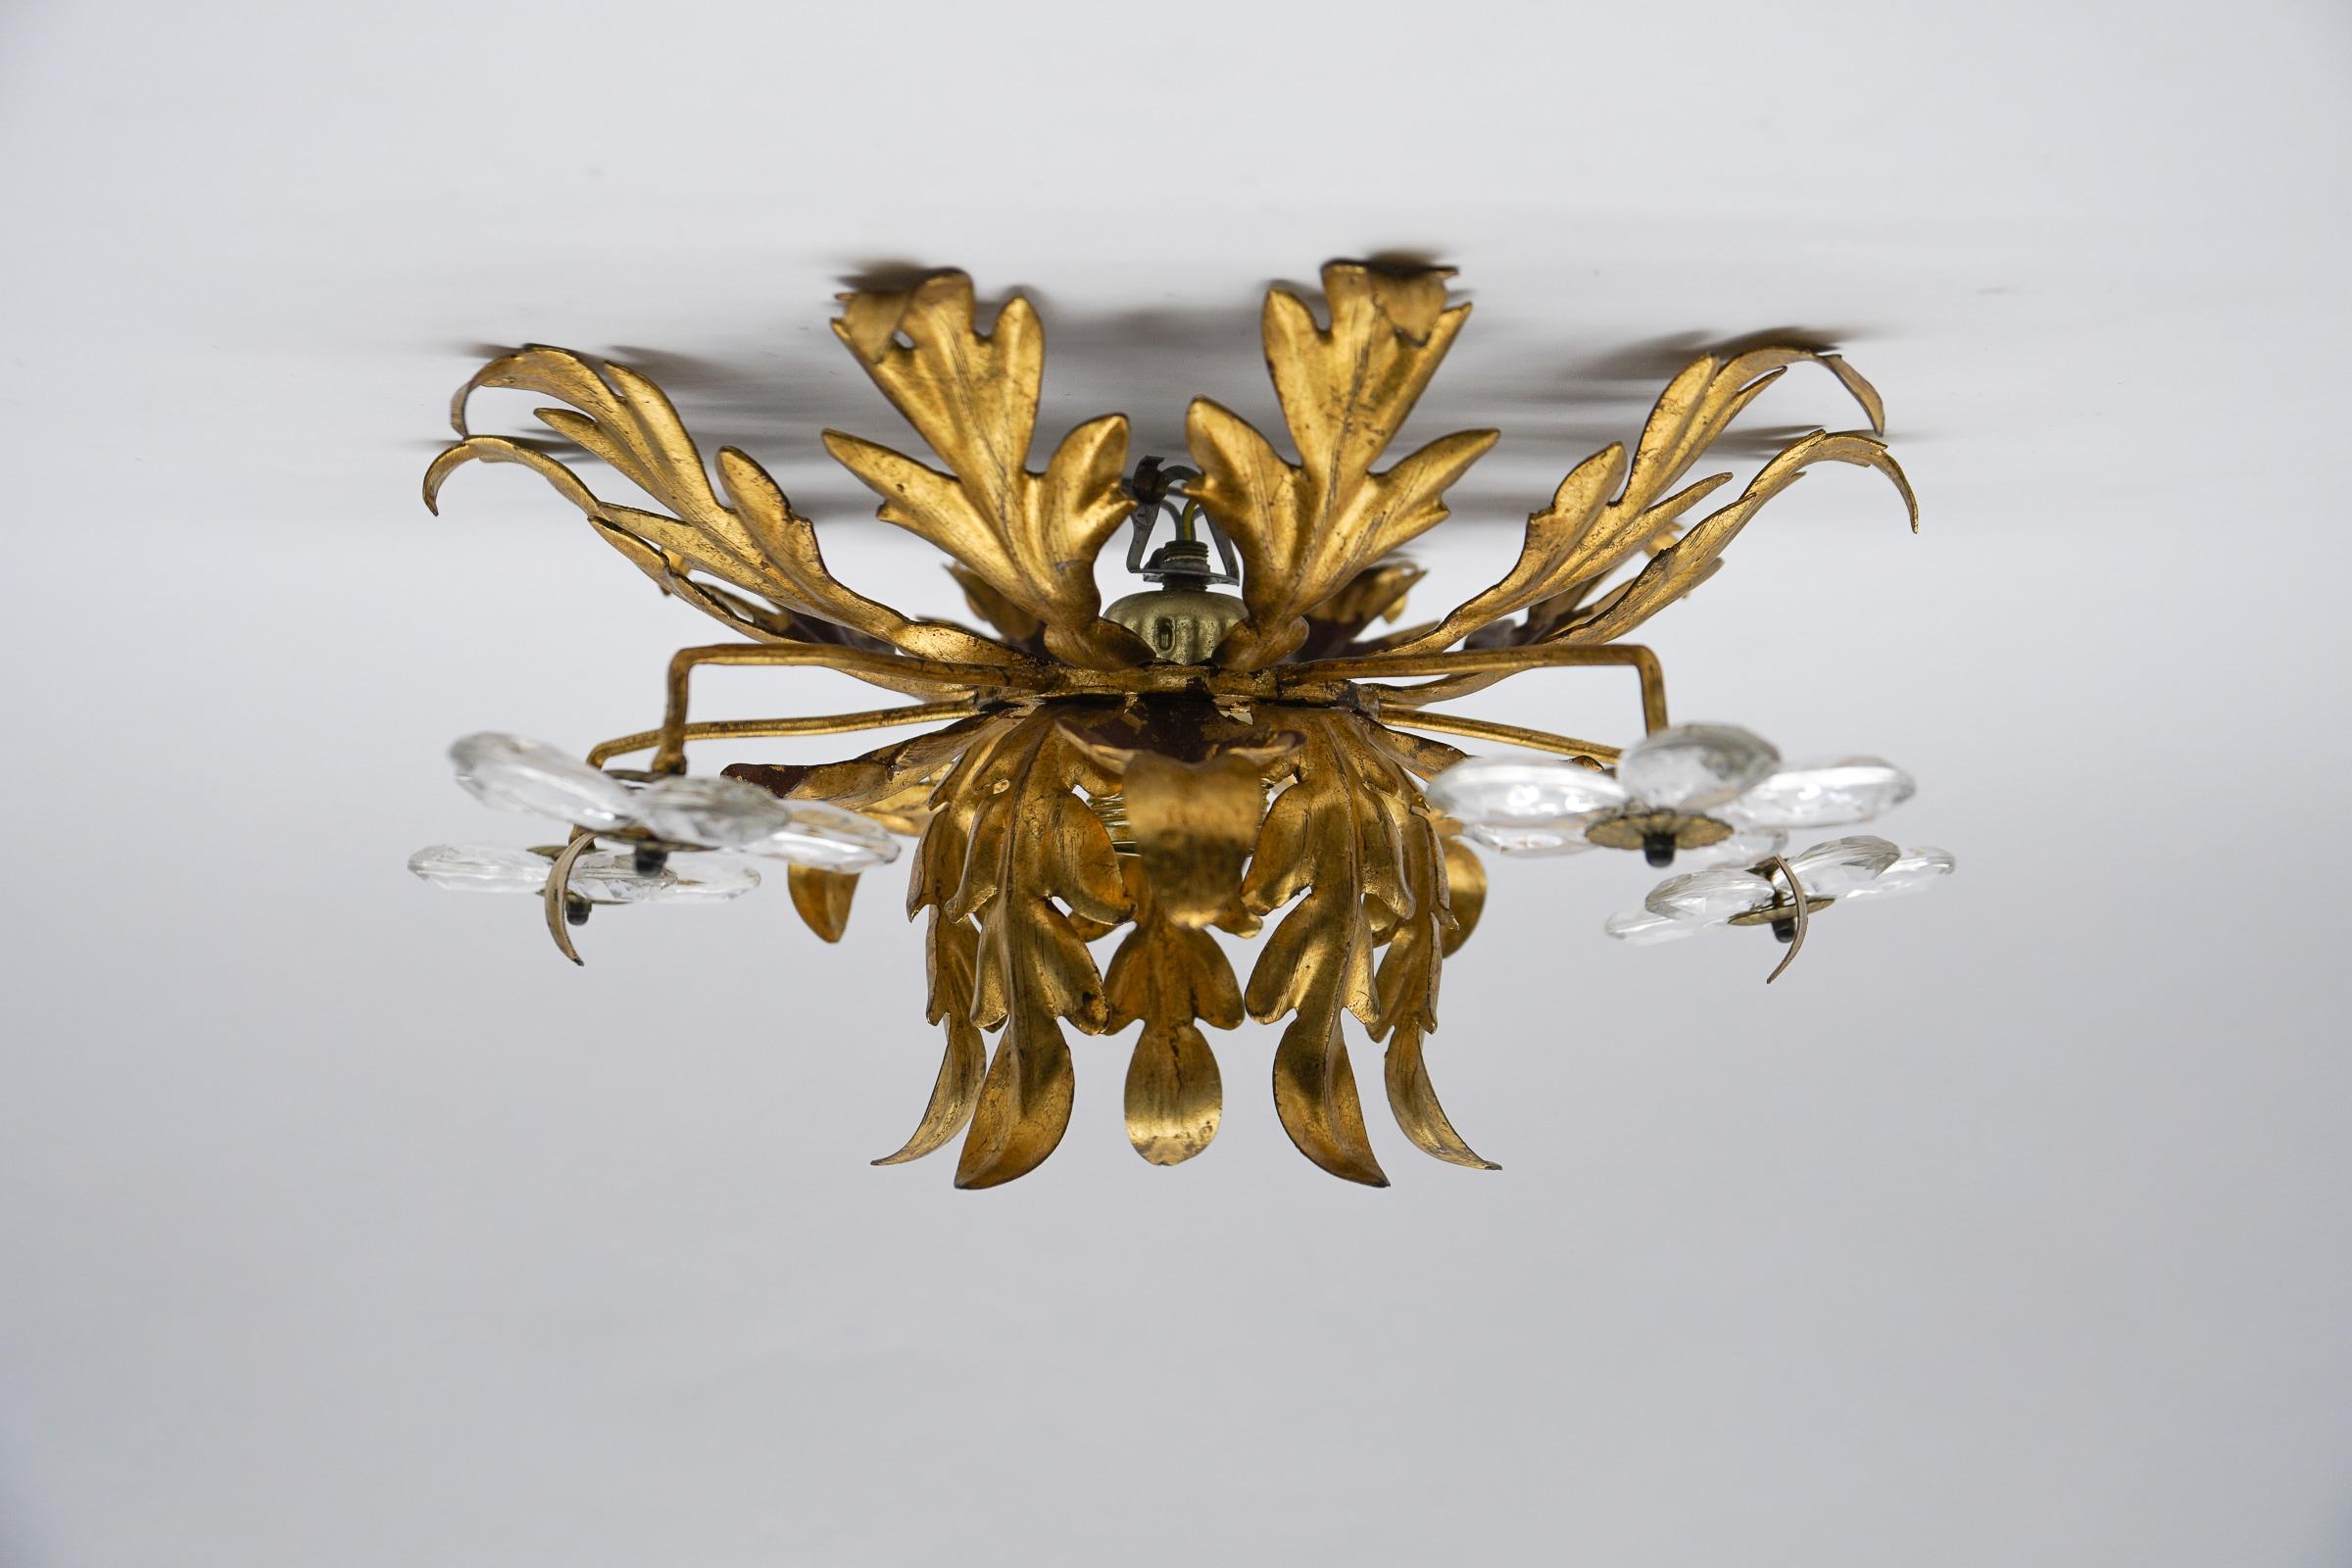 Crystal Glass and Metal Florentine Ceiling Lamp by Banci Firenze, 1960s For Sale 4